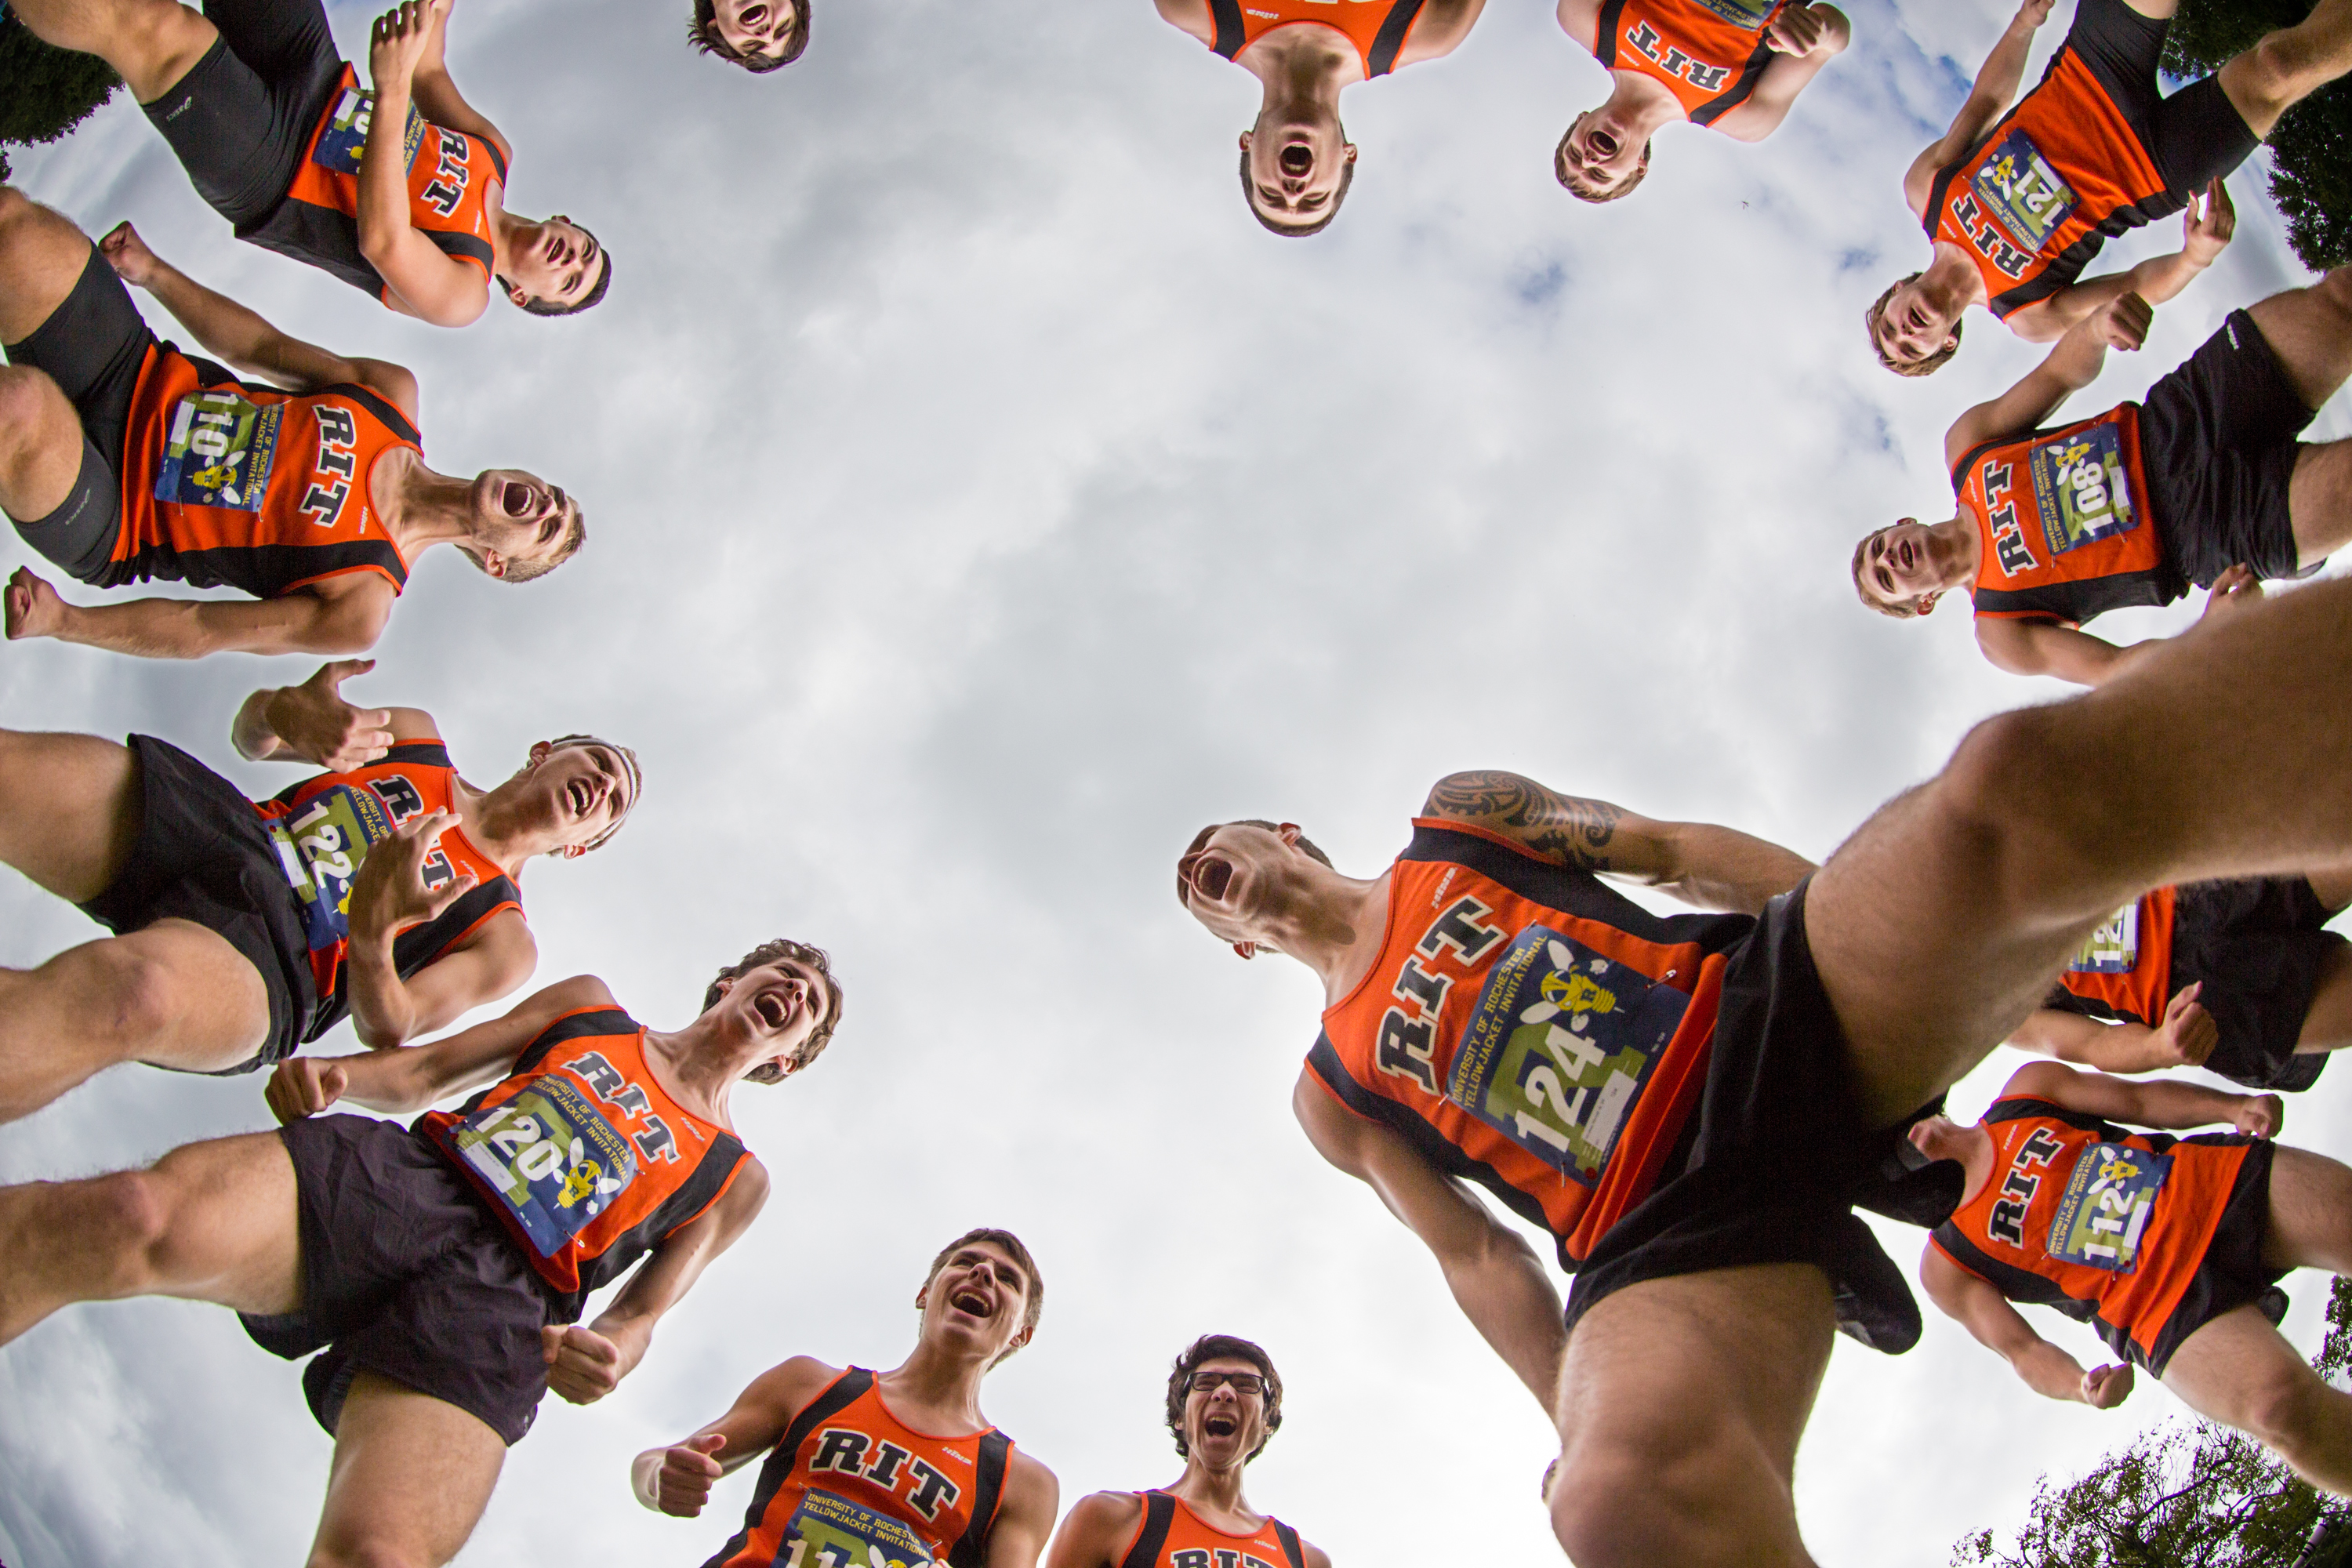 The RIT men's cross country team cheers before the University of Rochester Invitational cross country meet at Genesee Valley Park in Rochester, N.Y., on Saturday, Sept. 14, 2013. Photo by Josh Barber